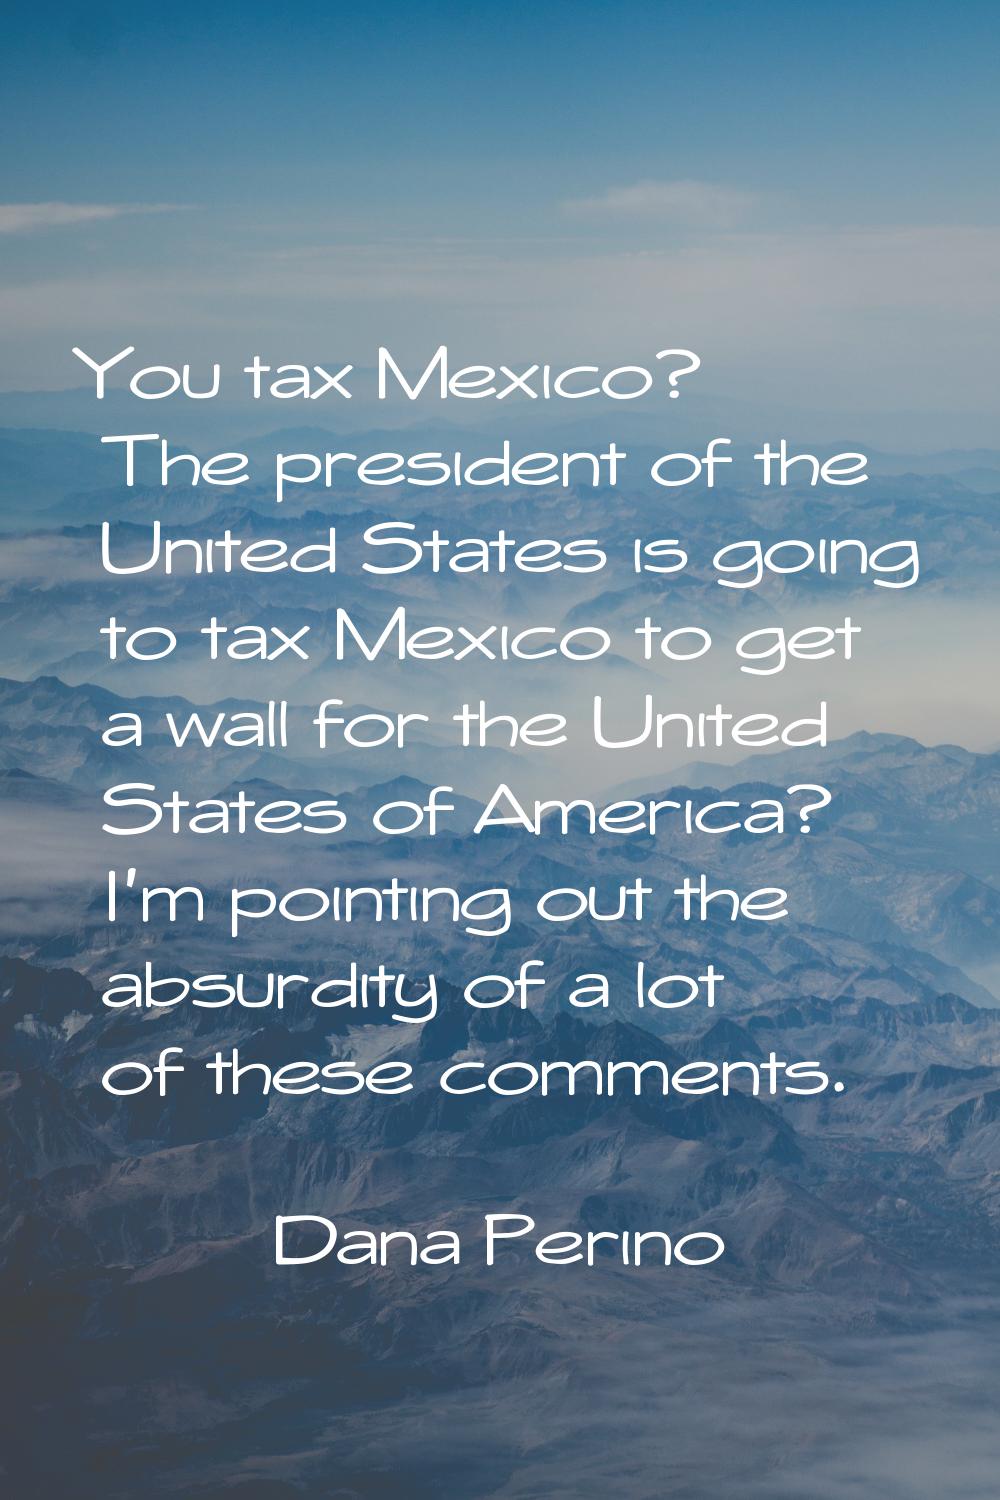 You tax Mexico? The president of the United States is going to tax Mexico to get a wall for the Uni